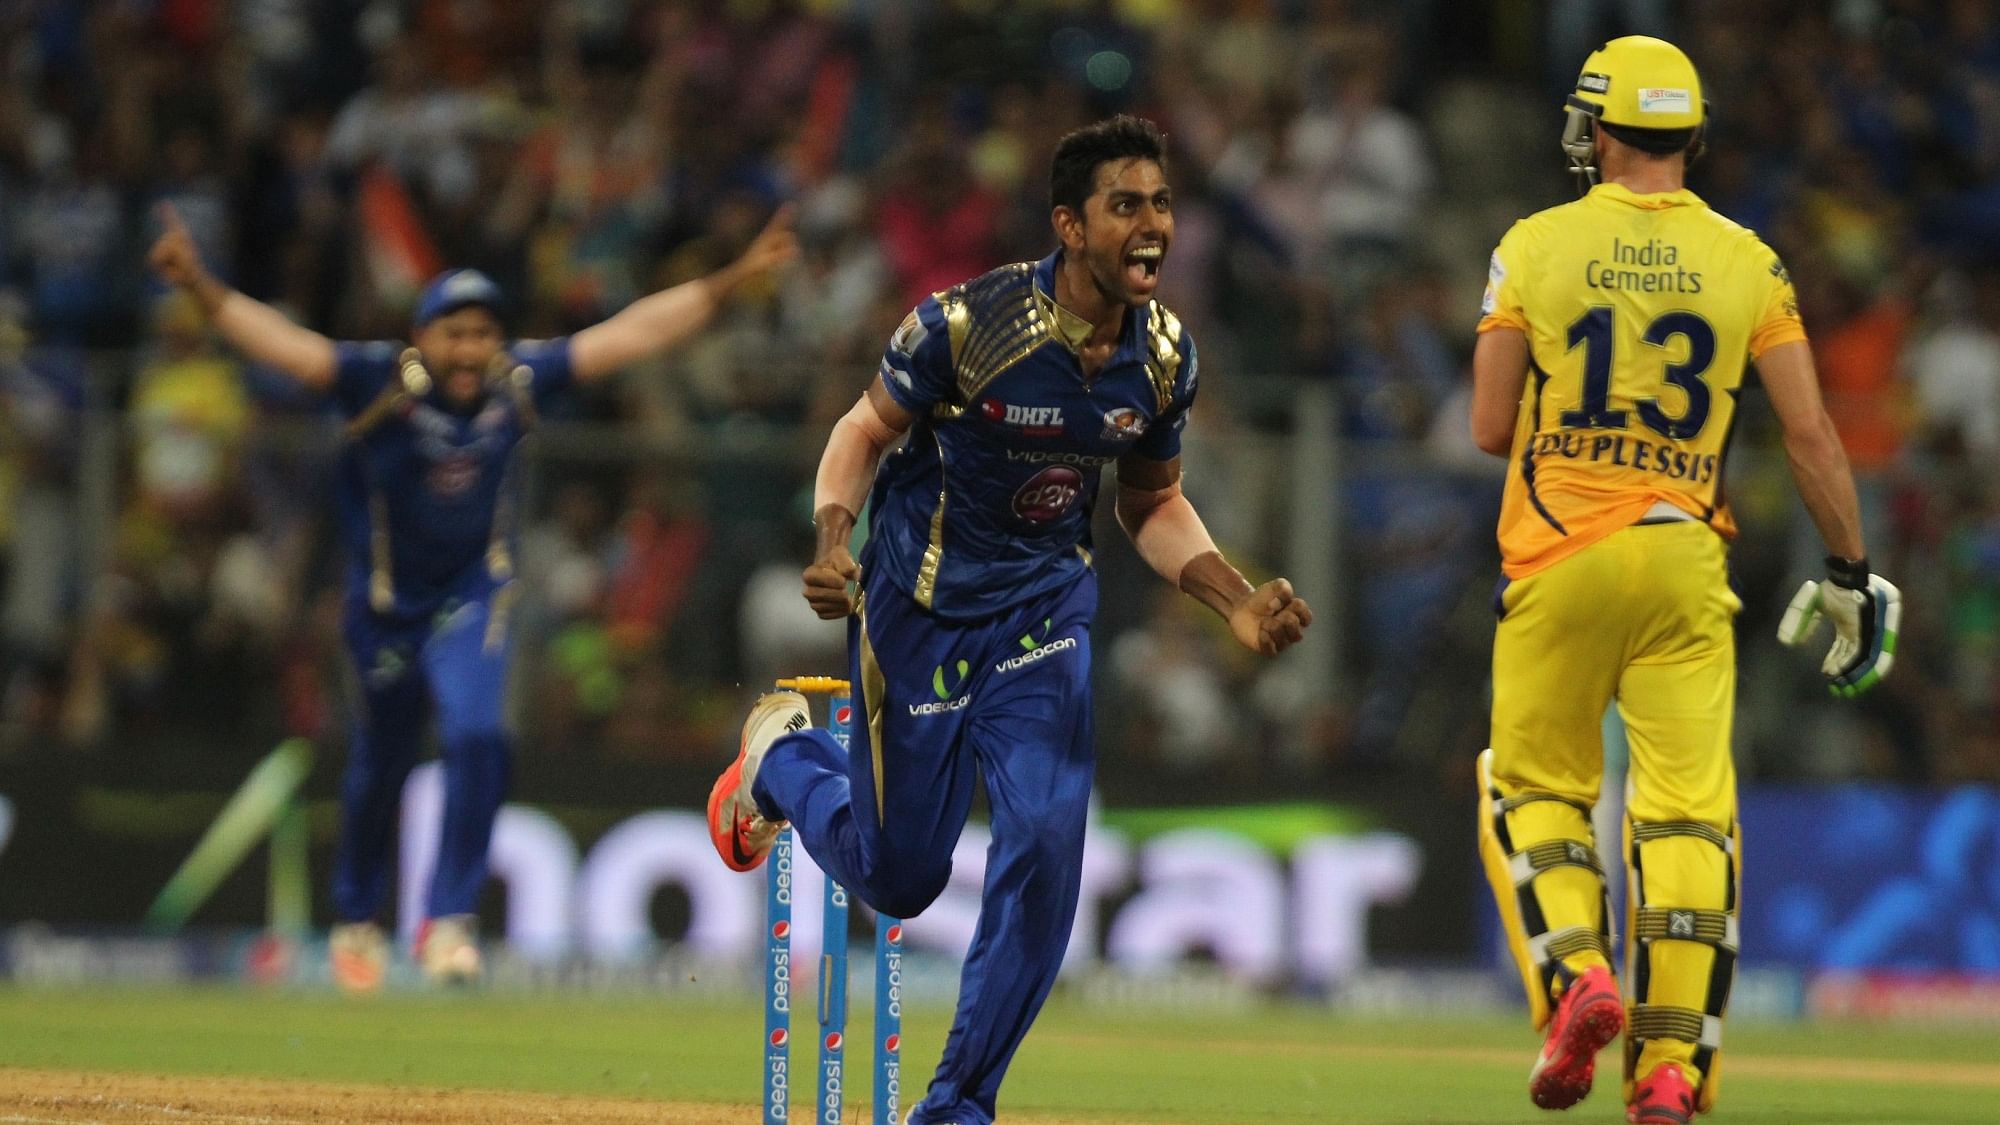 Jagadeesha Suchith celebrates fall of a wicket during the first qualifier match of IPL 2015 between Mumbai Indians and Chennai Super Kings.